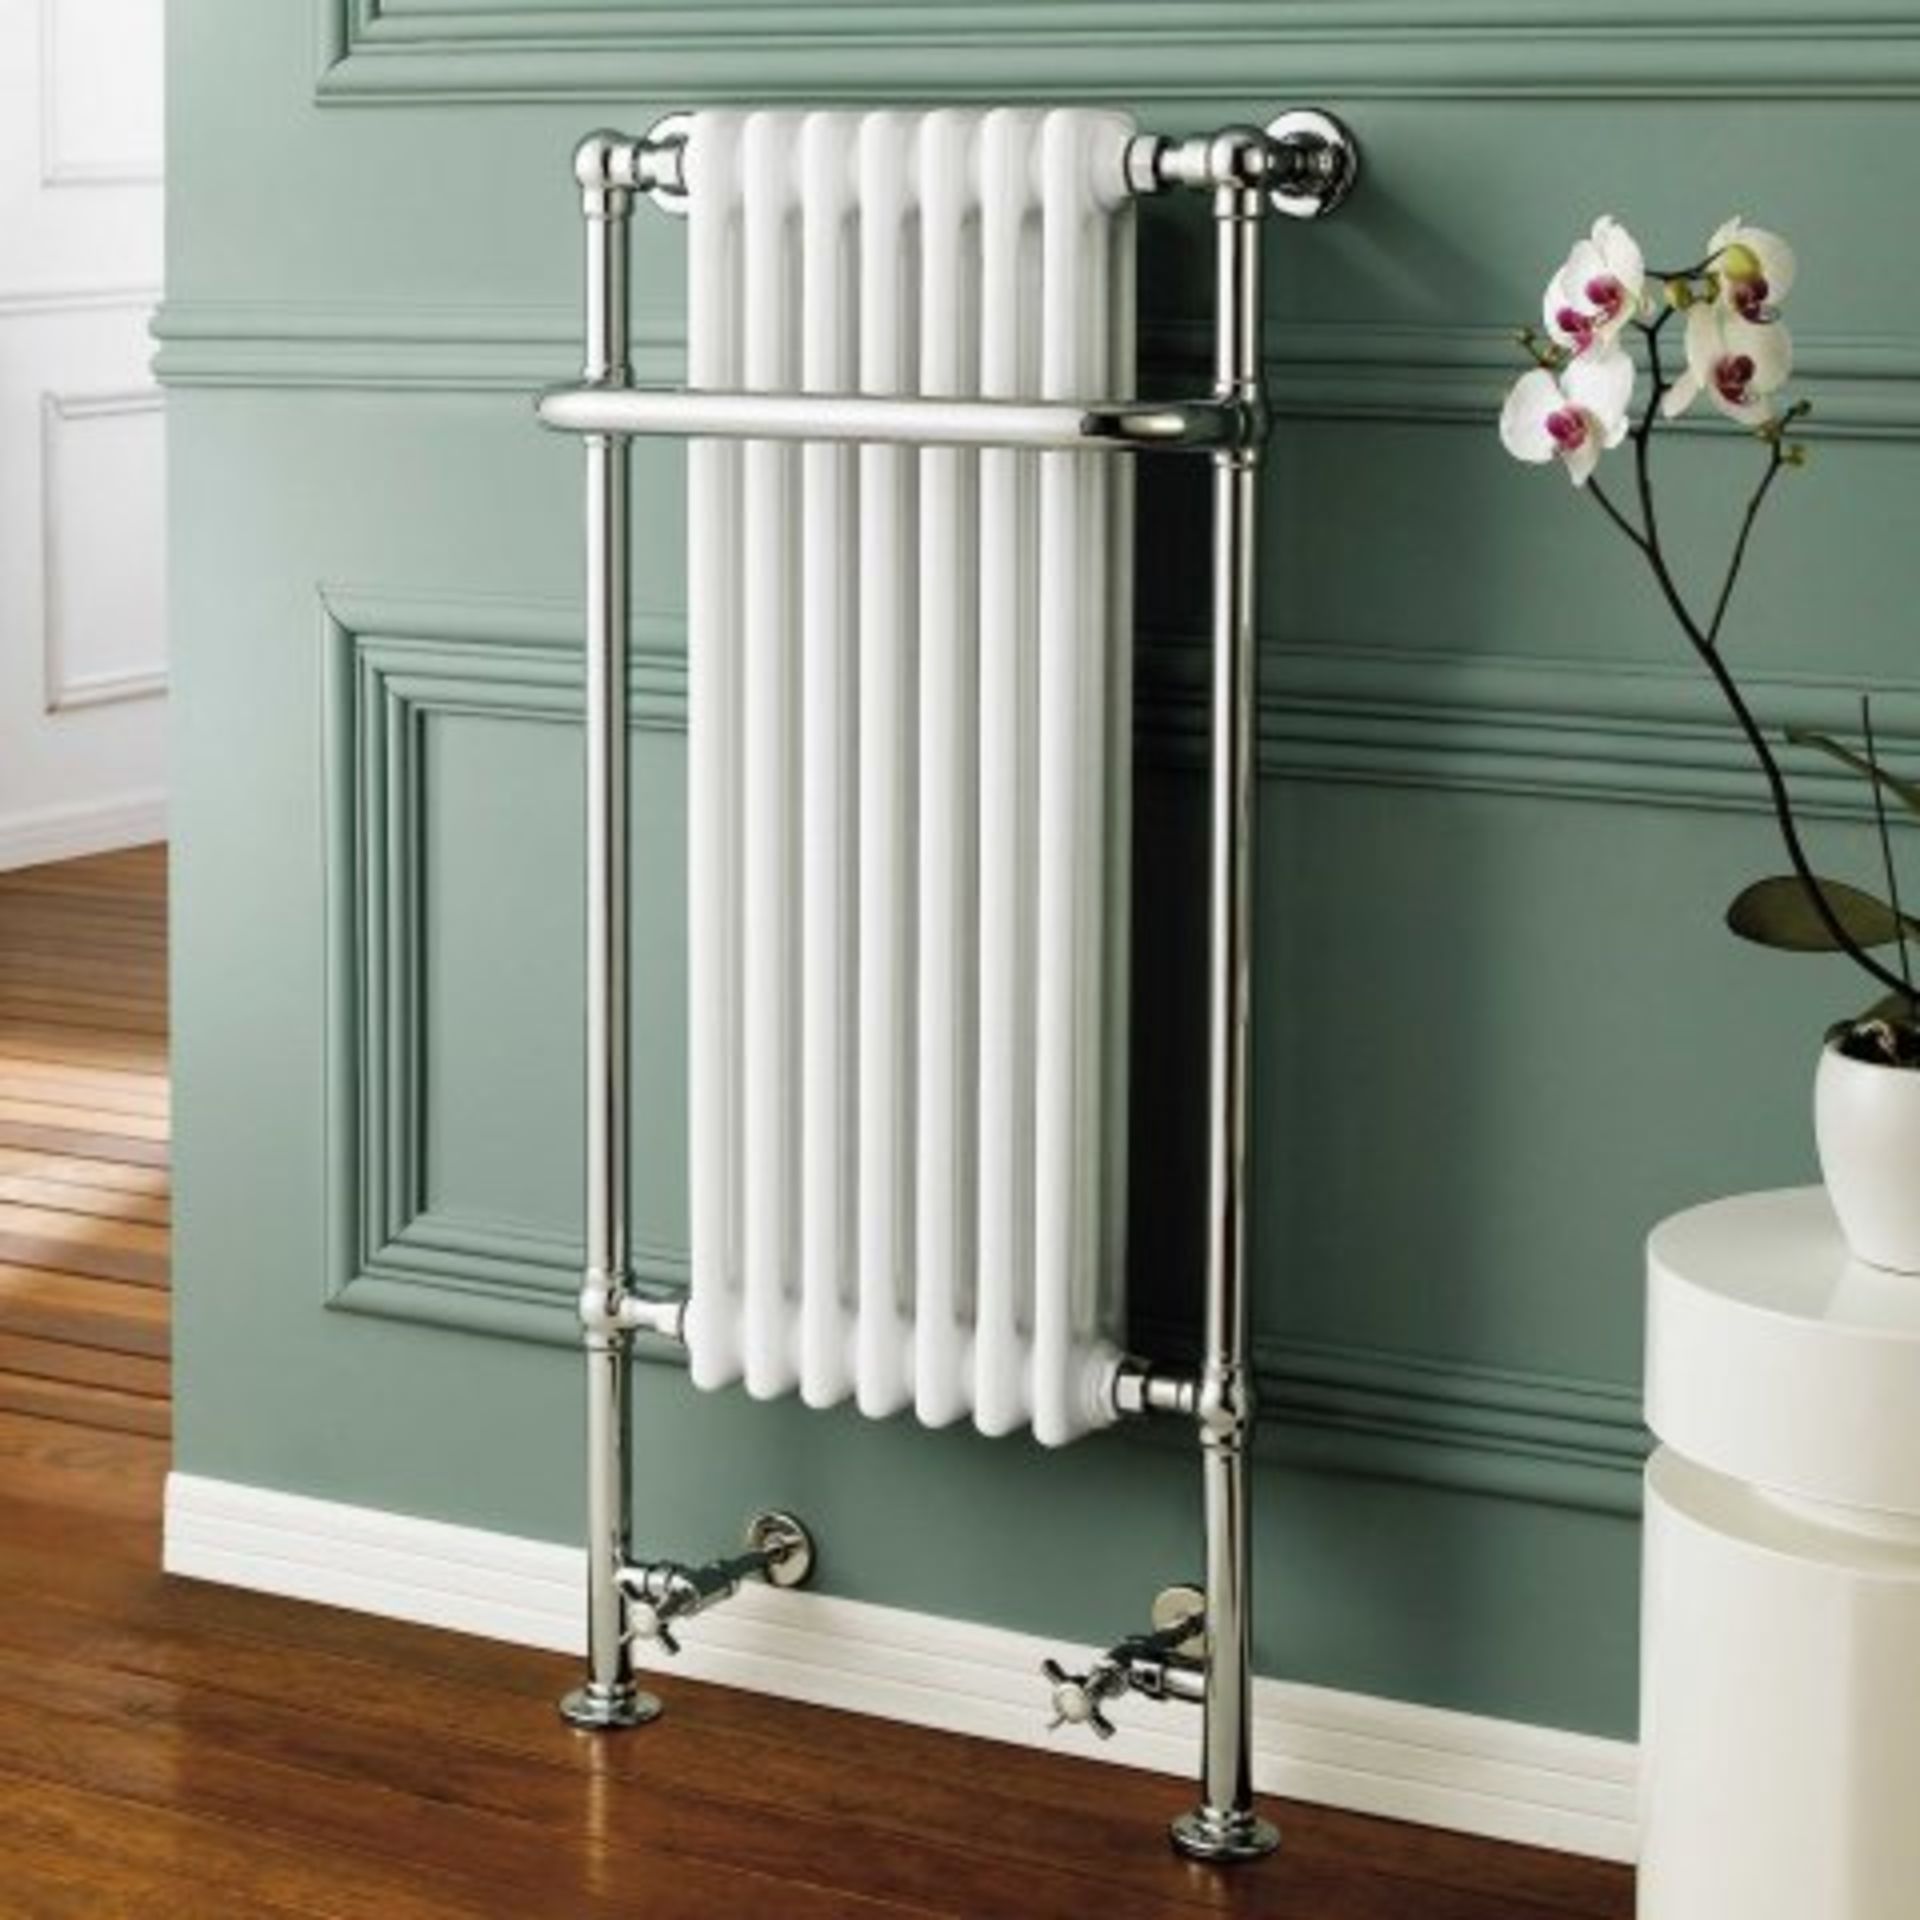 N48 - 1130x553mm Tall Traditional White Towel Rail Radiator - Victoria Premium Combining the best of